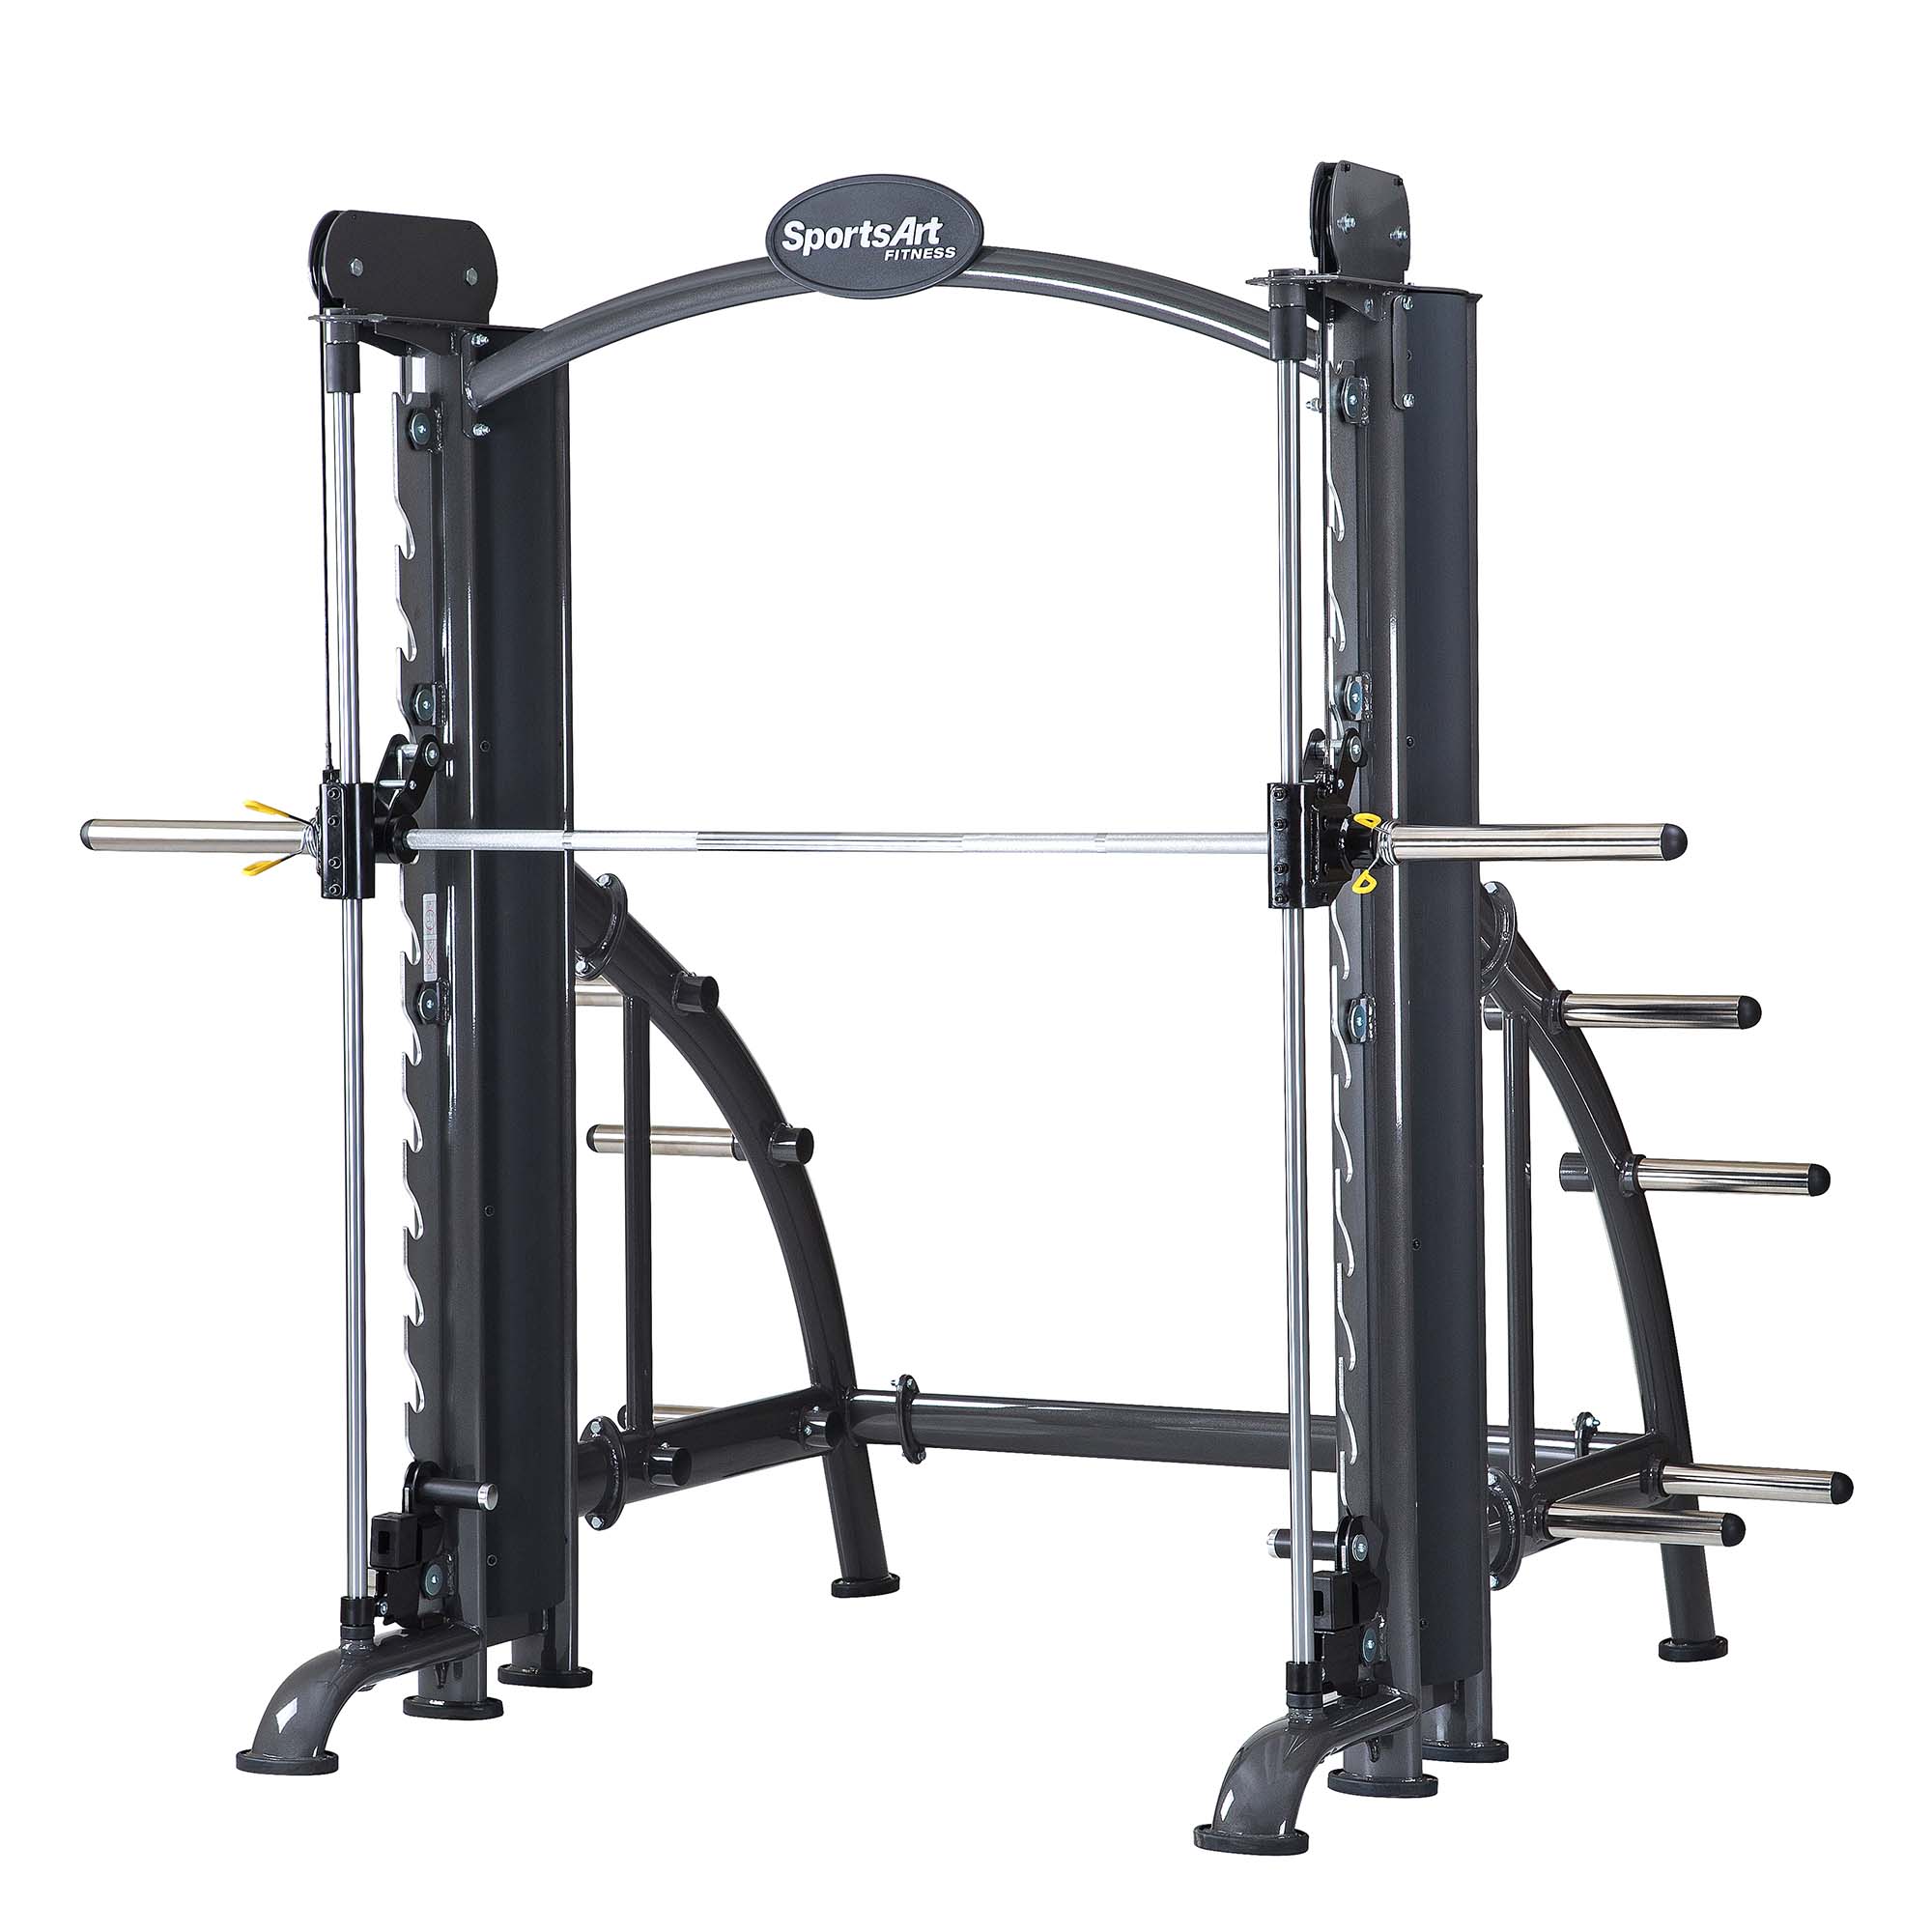 Buy SMITH MACHINE (A983) In South Florida